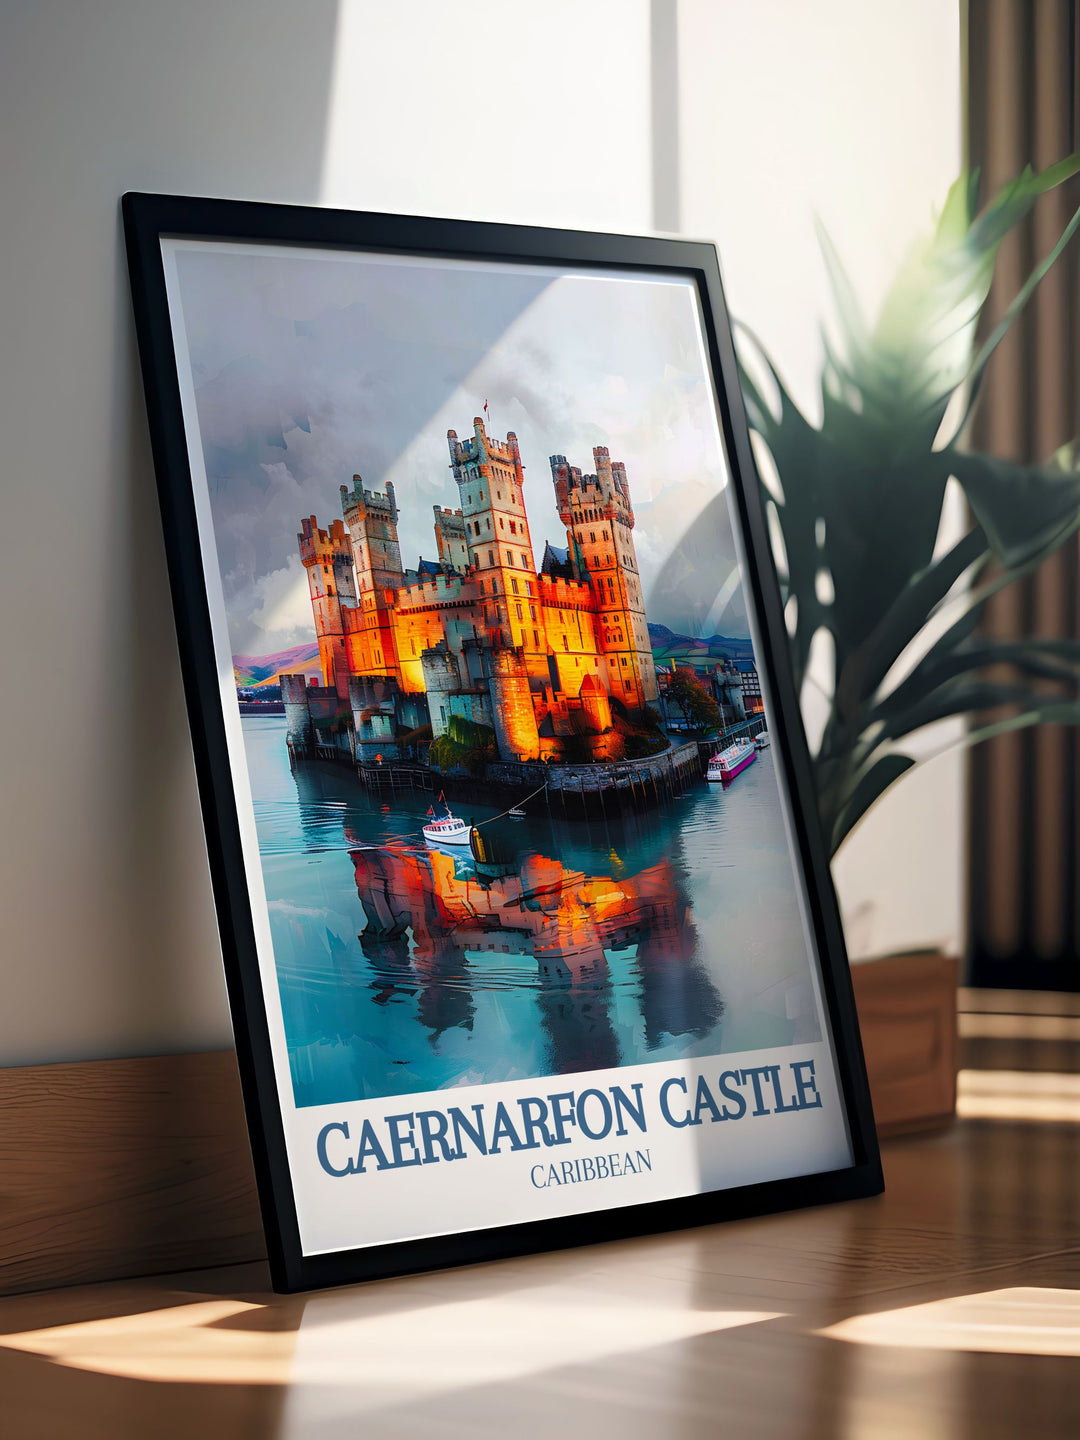 High quality print of Caernarfon Castle, Beddgelert Village, and Snowdon Ranger, capturing the stunning landscapes and historical charm of these iconic Welsh landmarks. Ideal for art lovers who appreciate both history and nature.